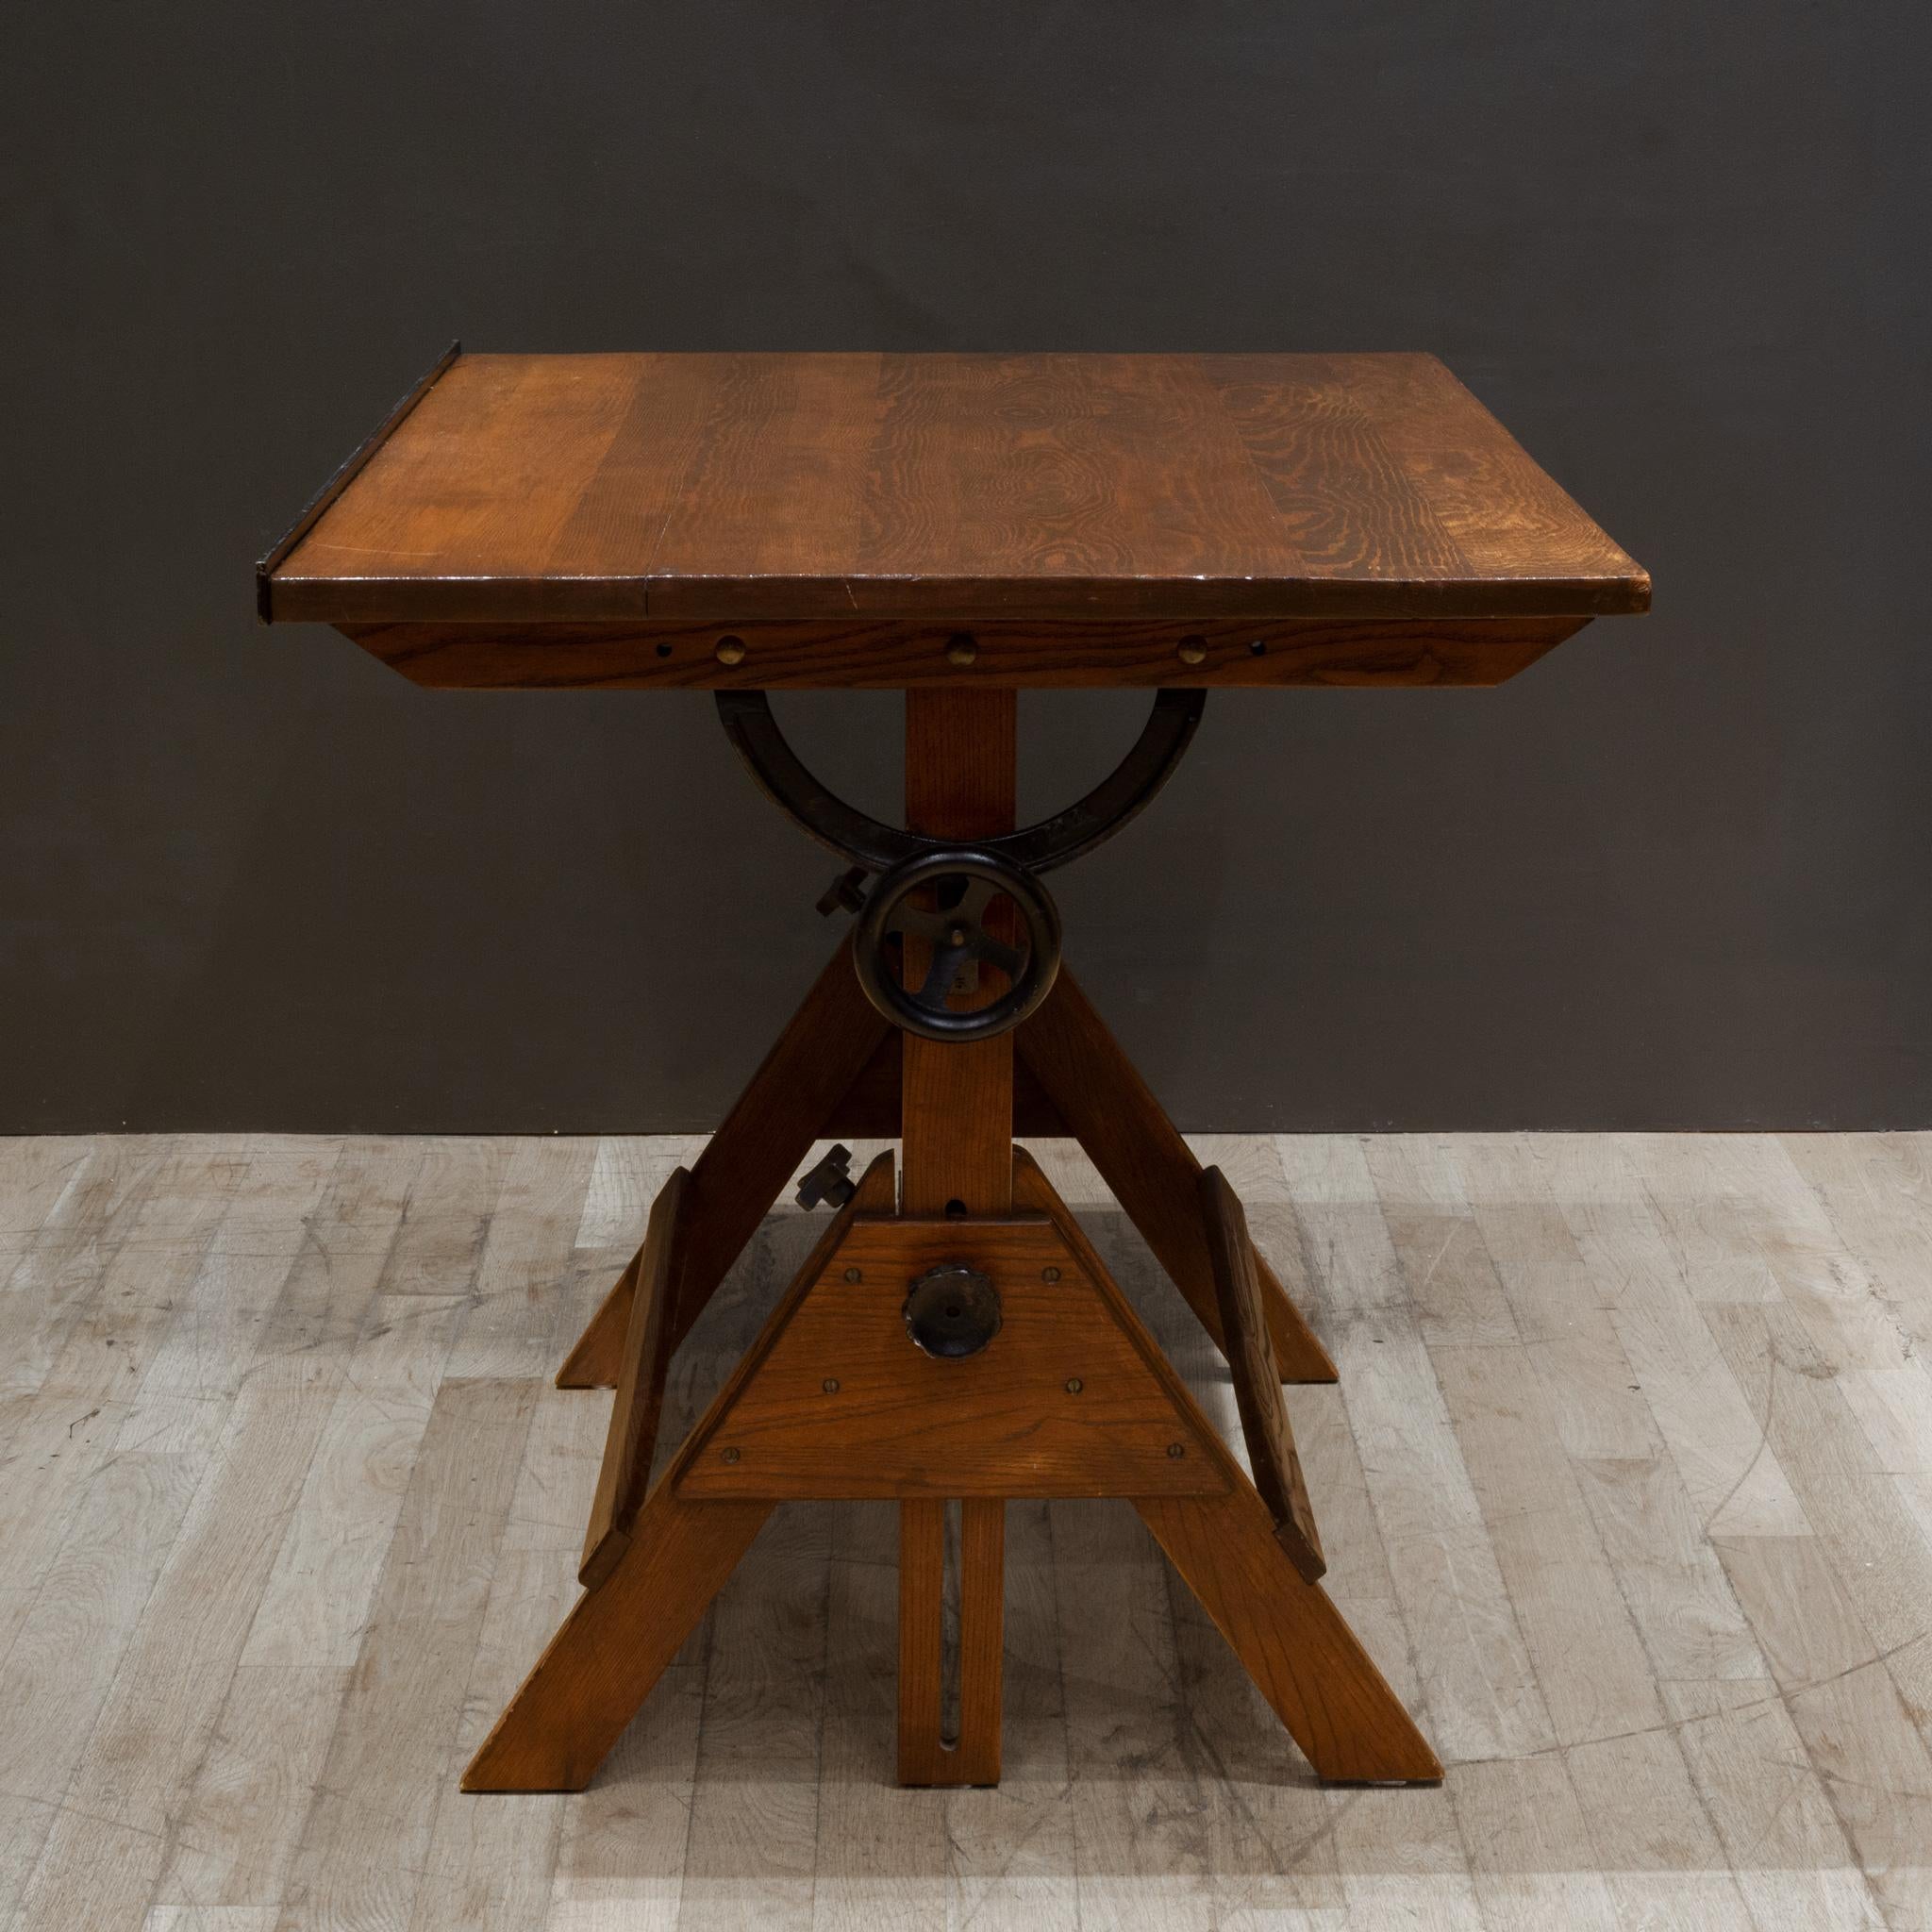 Vintage Anco Bilt Cast Iron and Wood Drafting Table/Desk c.1950 In Good Condition For Sale In San Francisco, CA